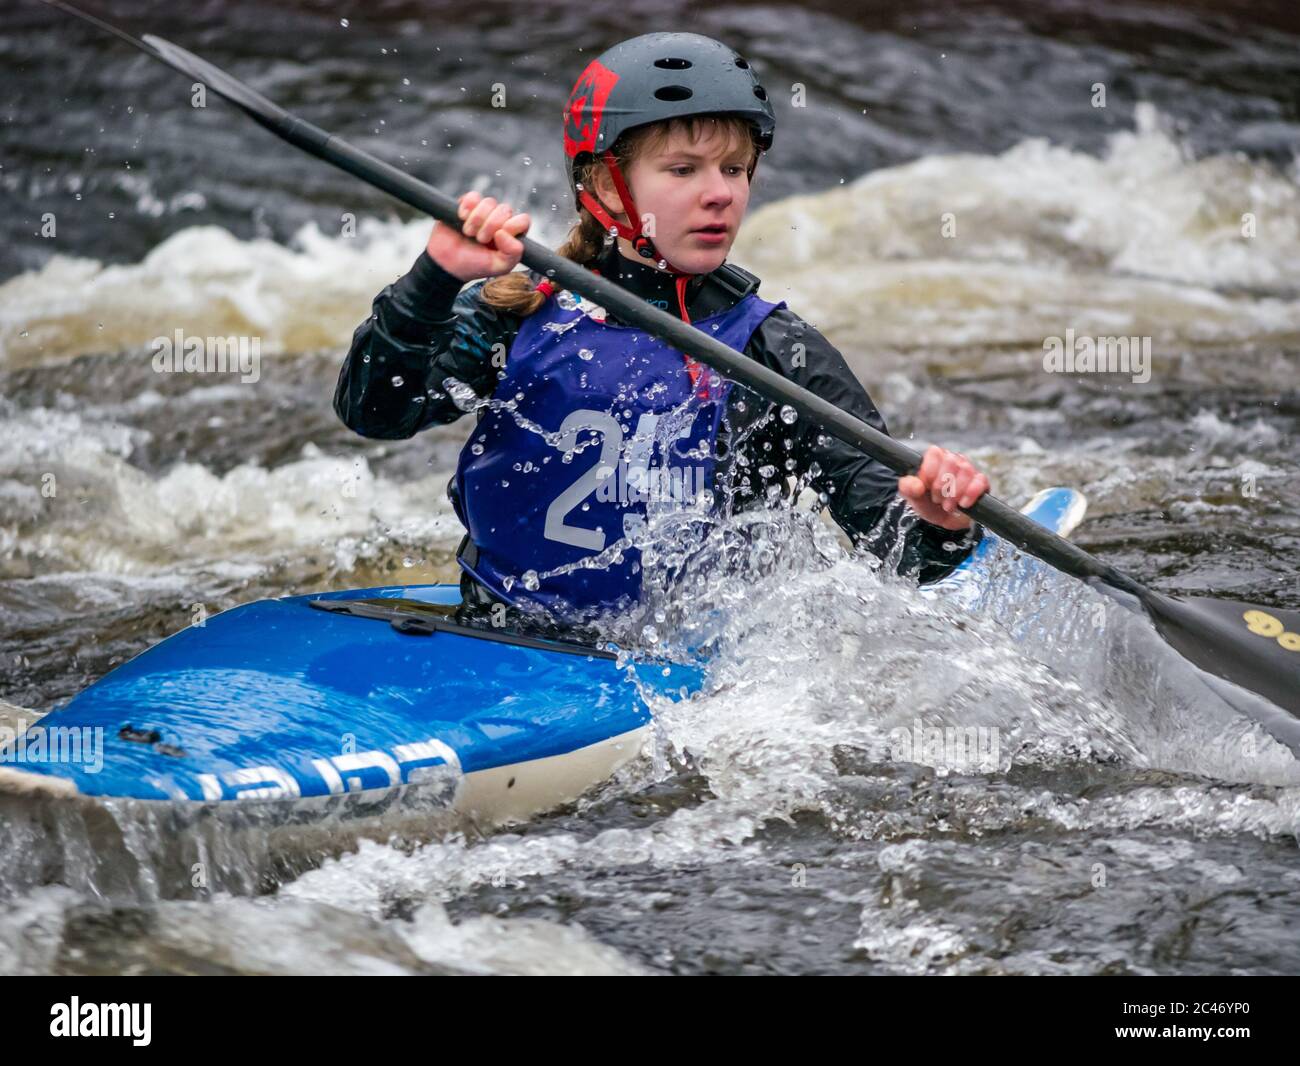 Premier Canoe Slalom: Jessie Anderson of Breadalbane Canoe Club competes in the K1 on the River Tay, Grandtully, Perthshire, Scotland, UK Stock Photo